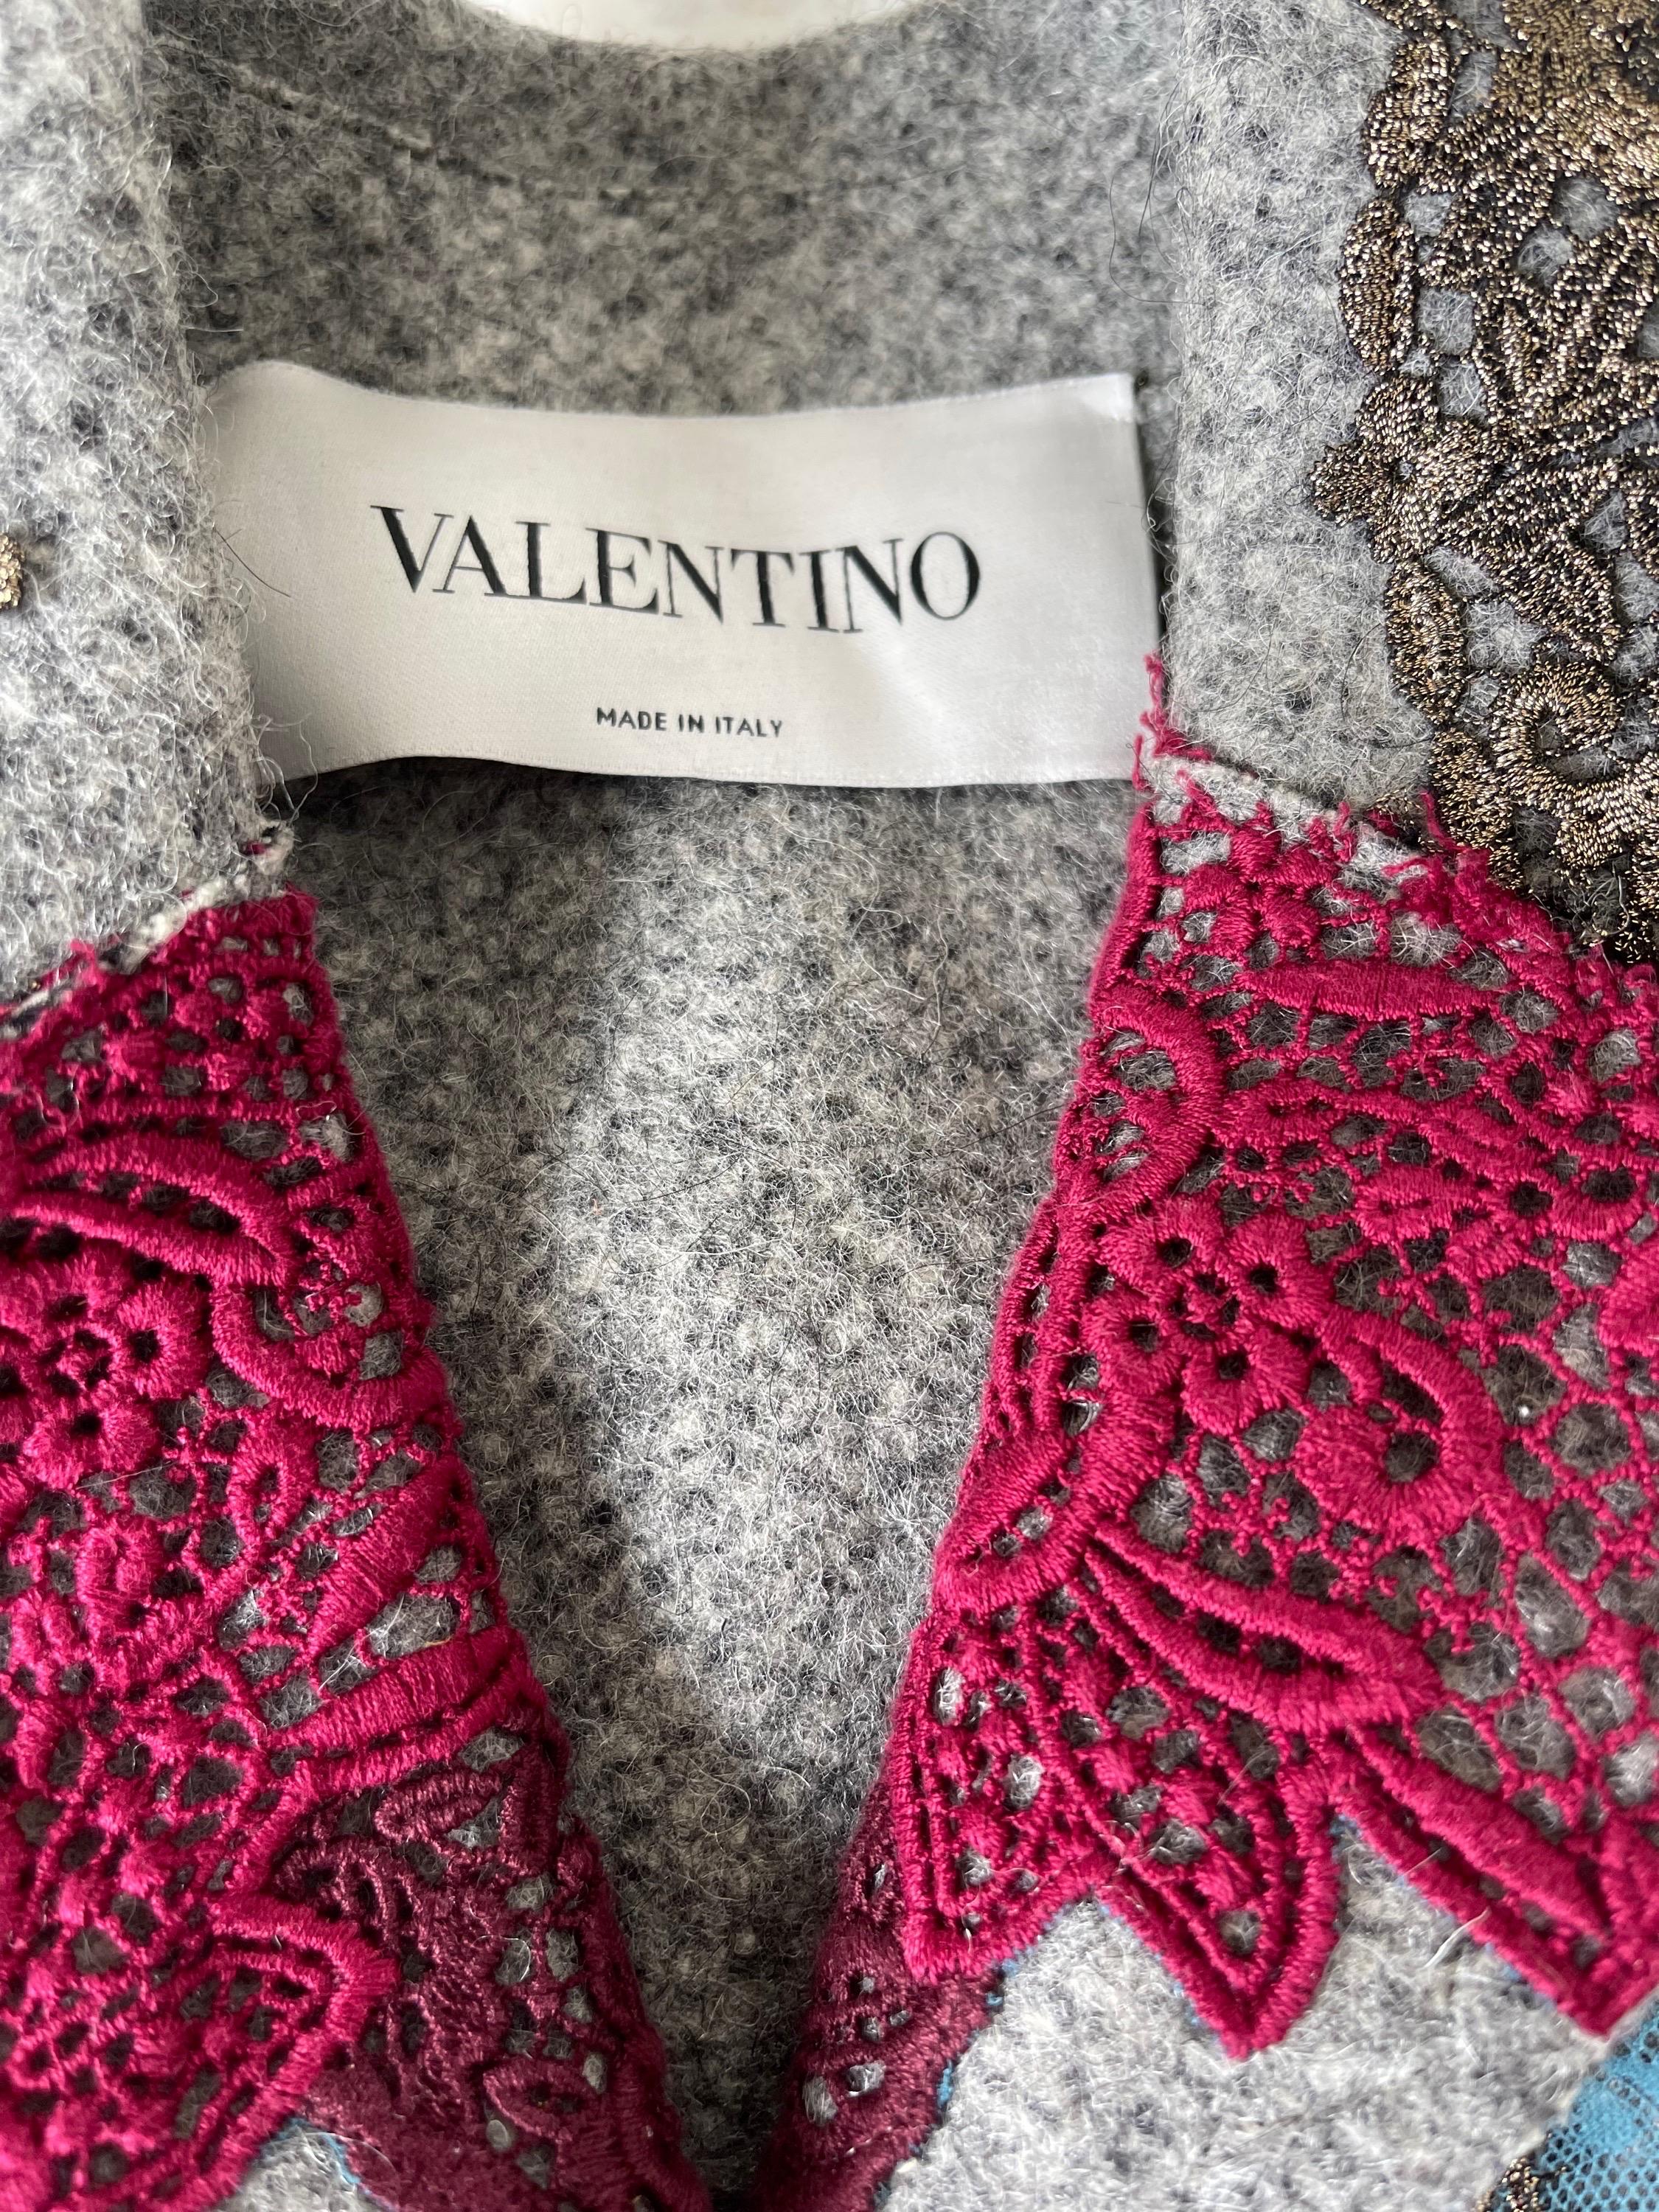 Valentino Blake Lively Fall 2015 Runway Size 2 Lace Wool Patchwork Jacket Coat In Excellent Condition For Sale In San Diego, CA